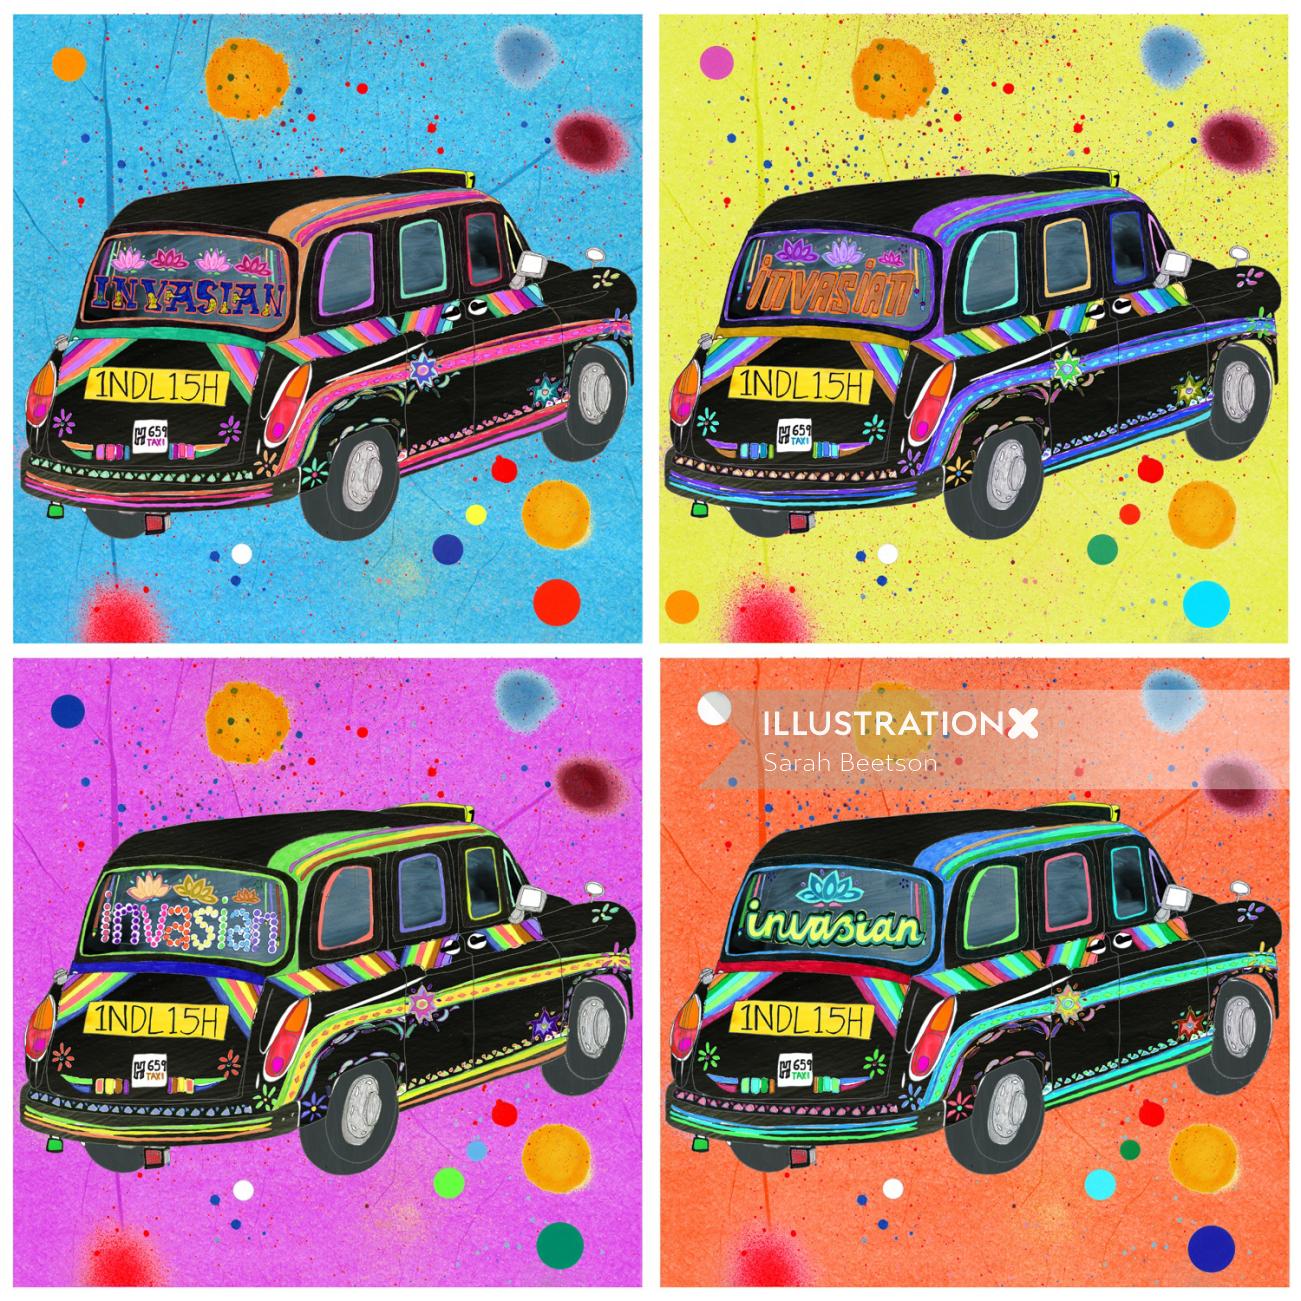 An illustration of London black cabs